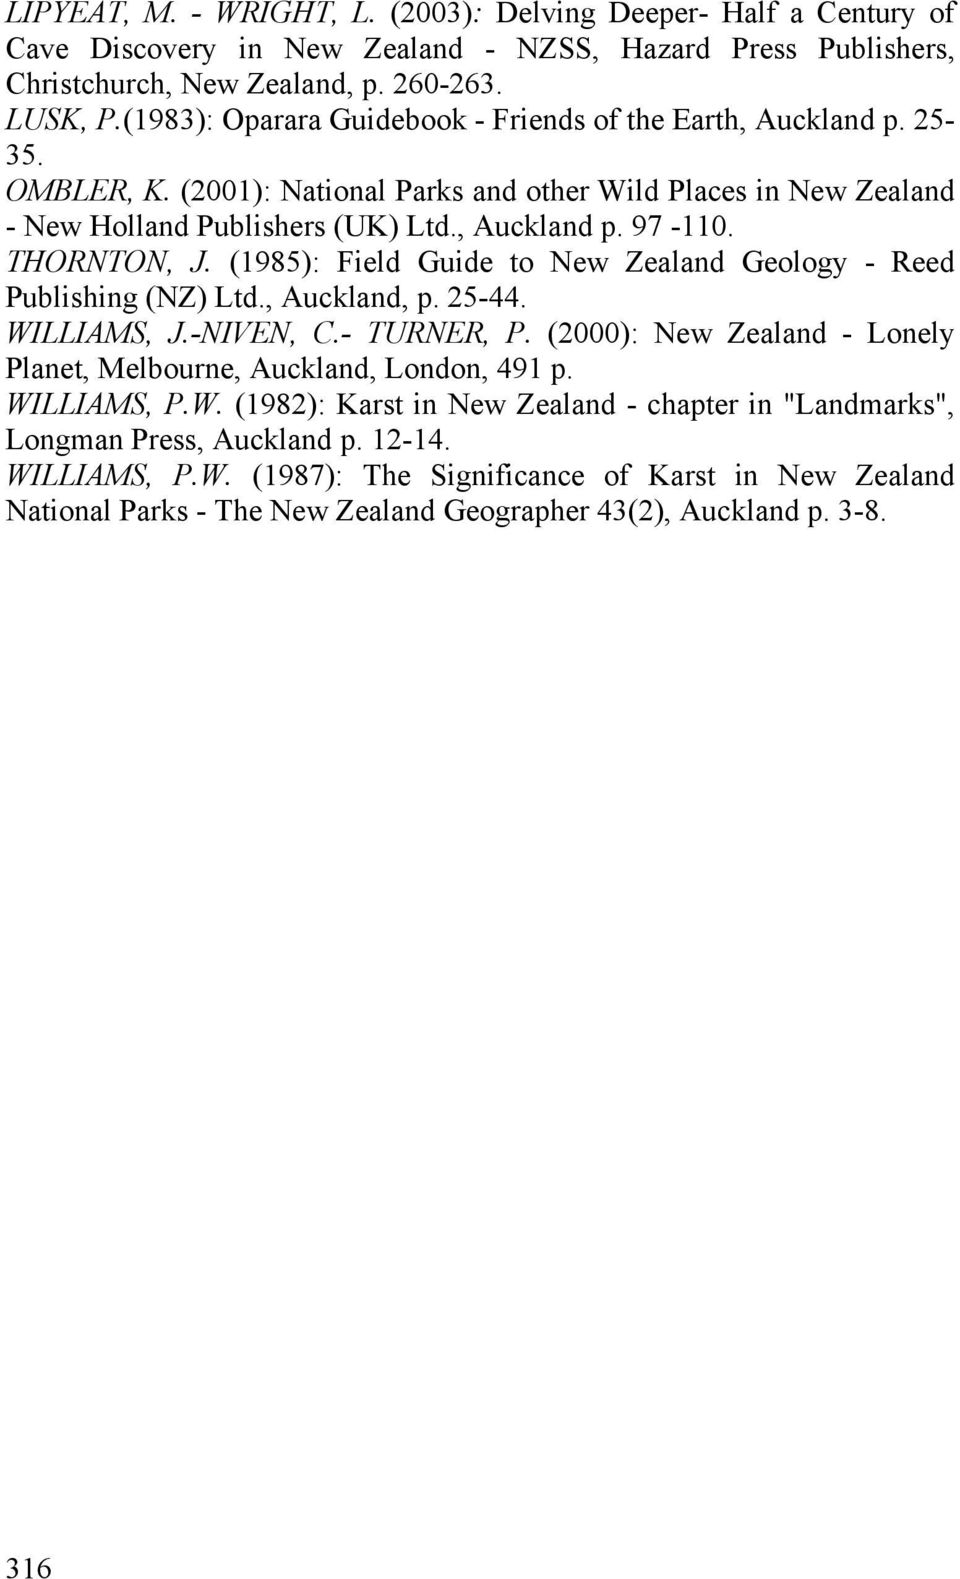 THORNTON, J. (1985): Field Guide to New Zealand Geology - Reed Publishing (NZ) Ltd., Auckland, p. 25-44. WILLIAMS, J.-NIVEN, C.- TURNER, P.